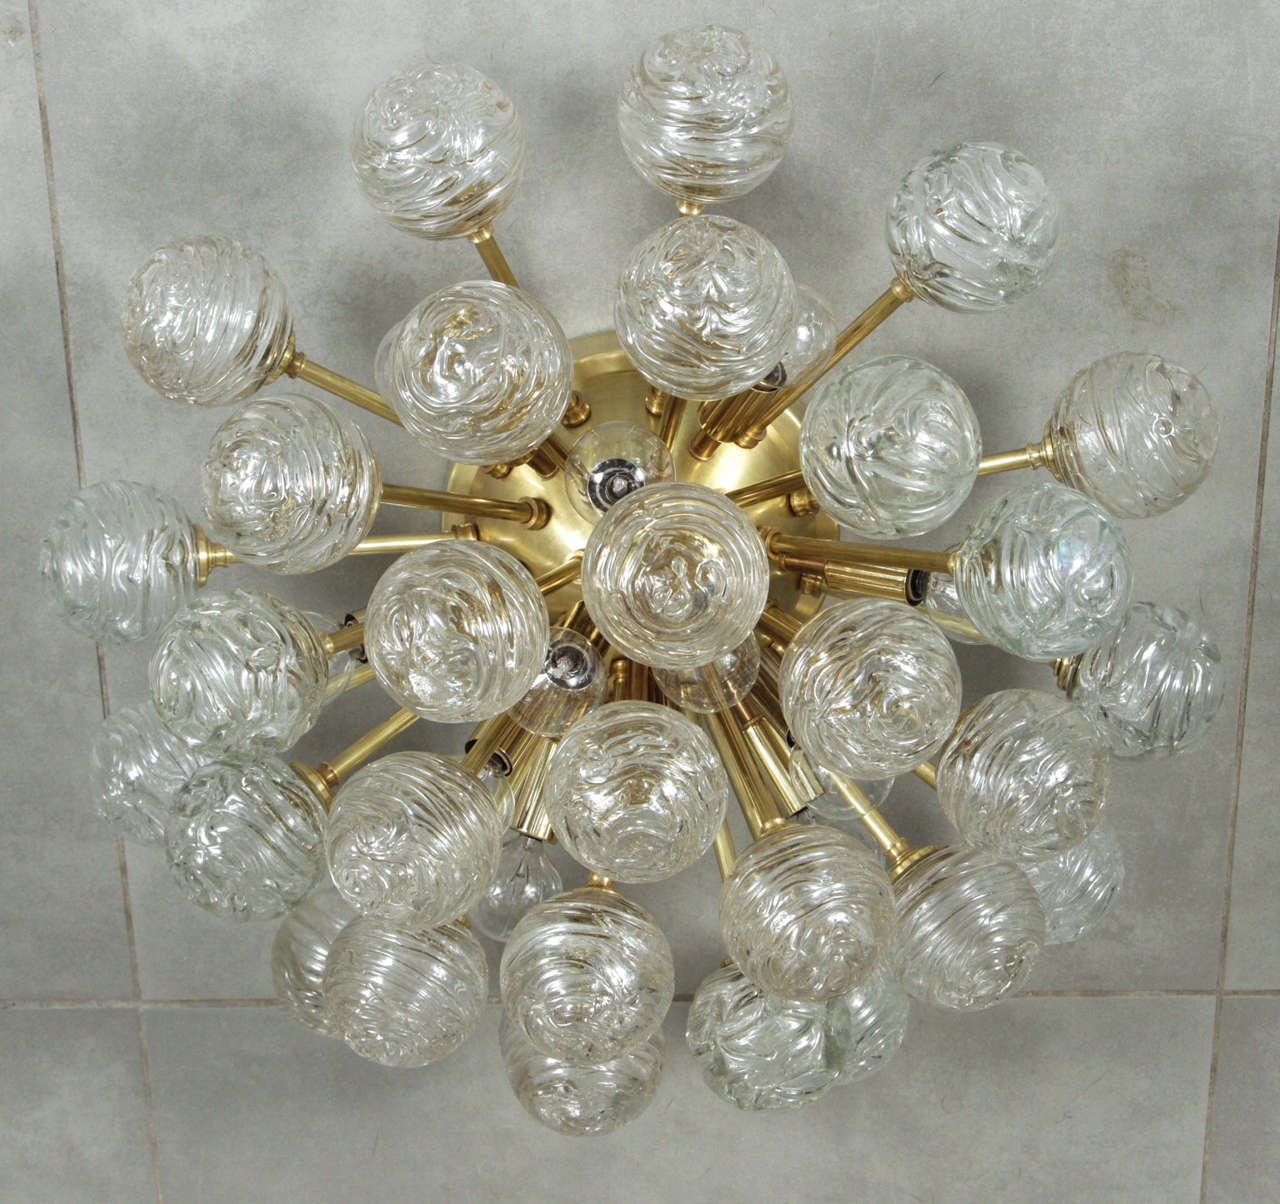 Giant Sputnik flush mount fixture by Doria Lighting Co.
This 1950s fixture has 31 Individual handblown swirl glass elements and 12 light sources to make this a truly stunning fixture when it is illuminated.
It is meant to be a flush mount, but